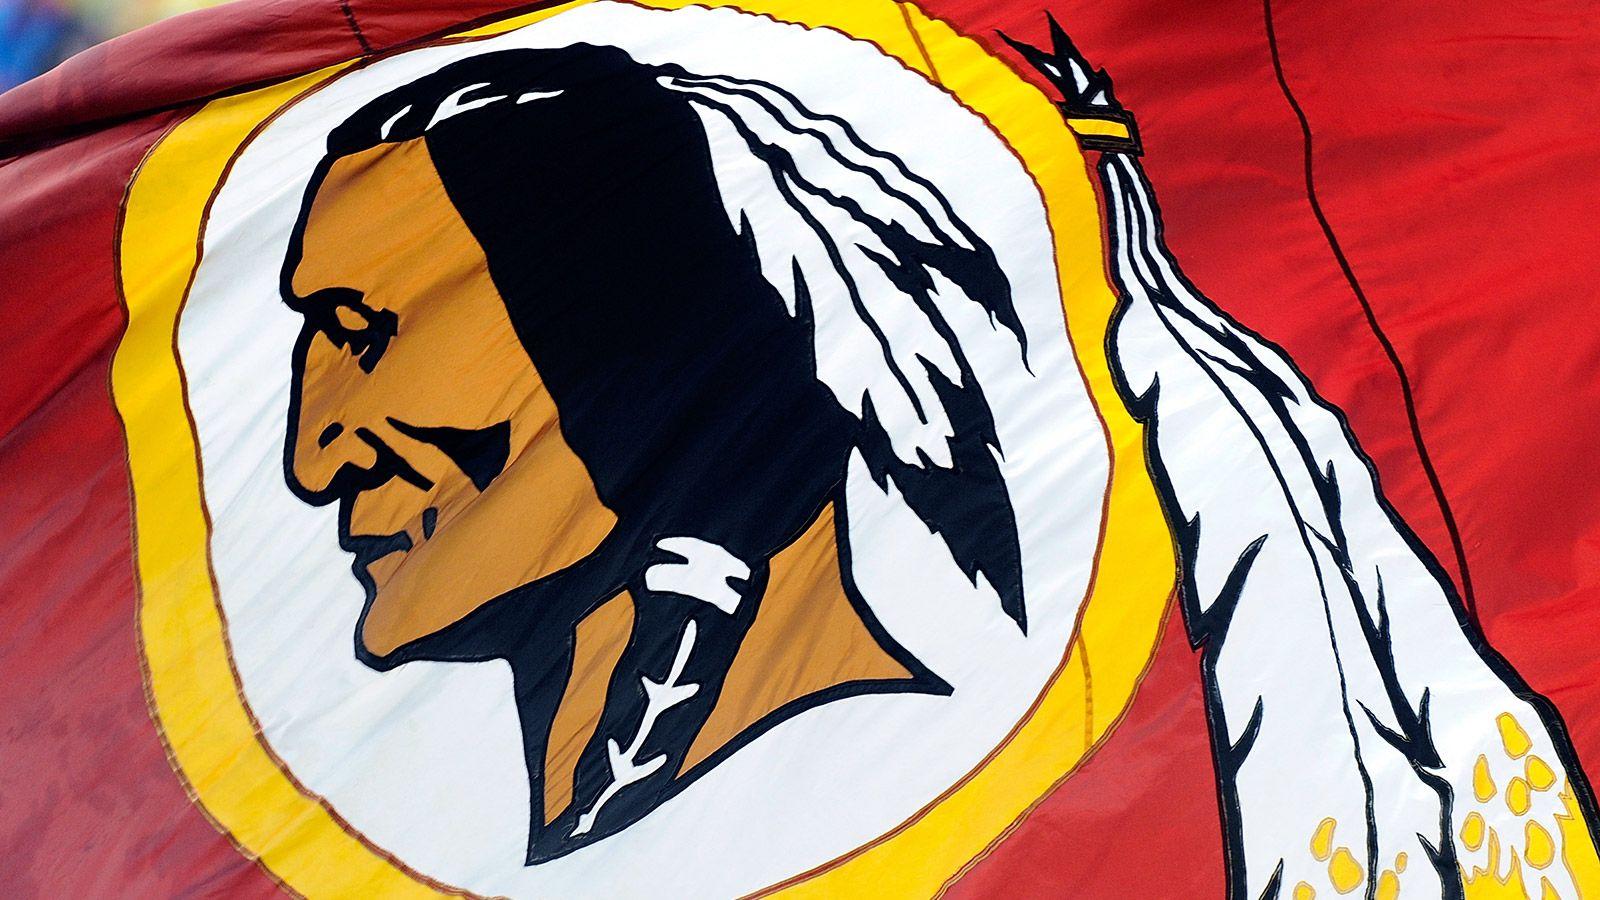 Washington Redskins lose trademark protection, so now what happens